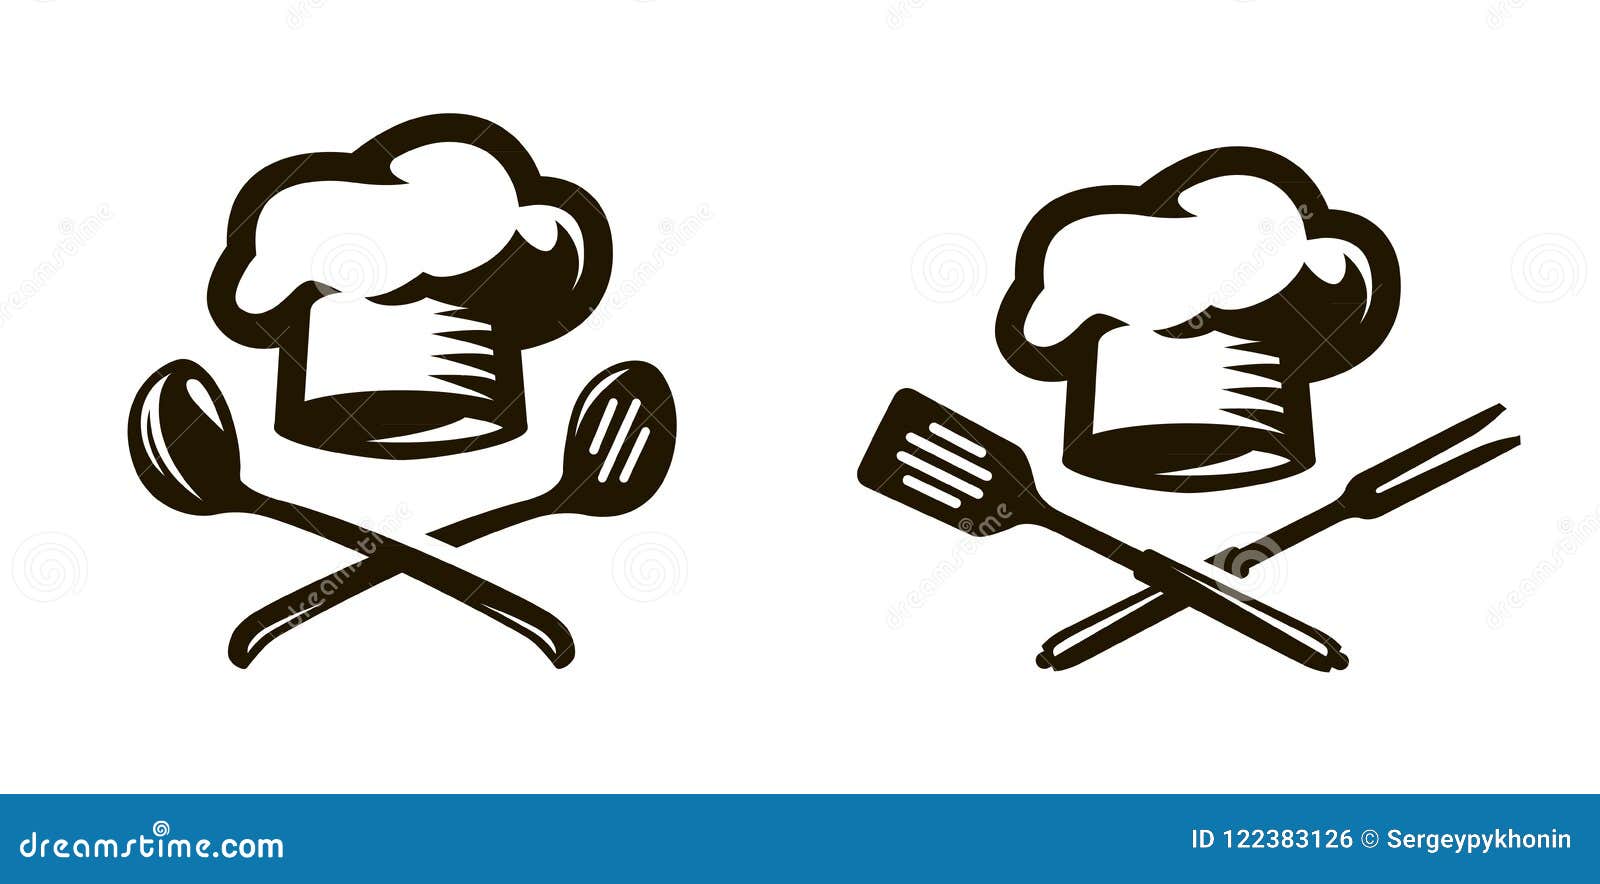 cook, chef logo or icon. labels for the menu of restaurant or cafe.  